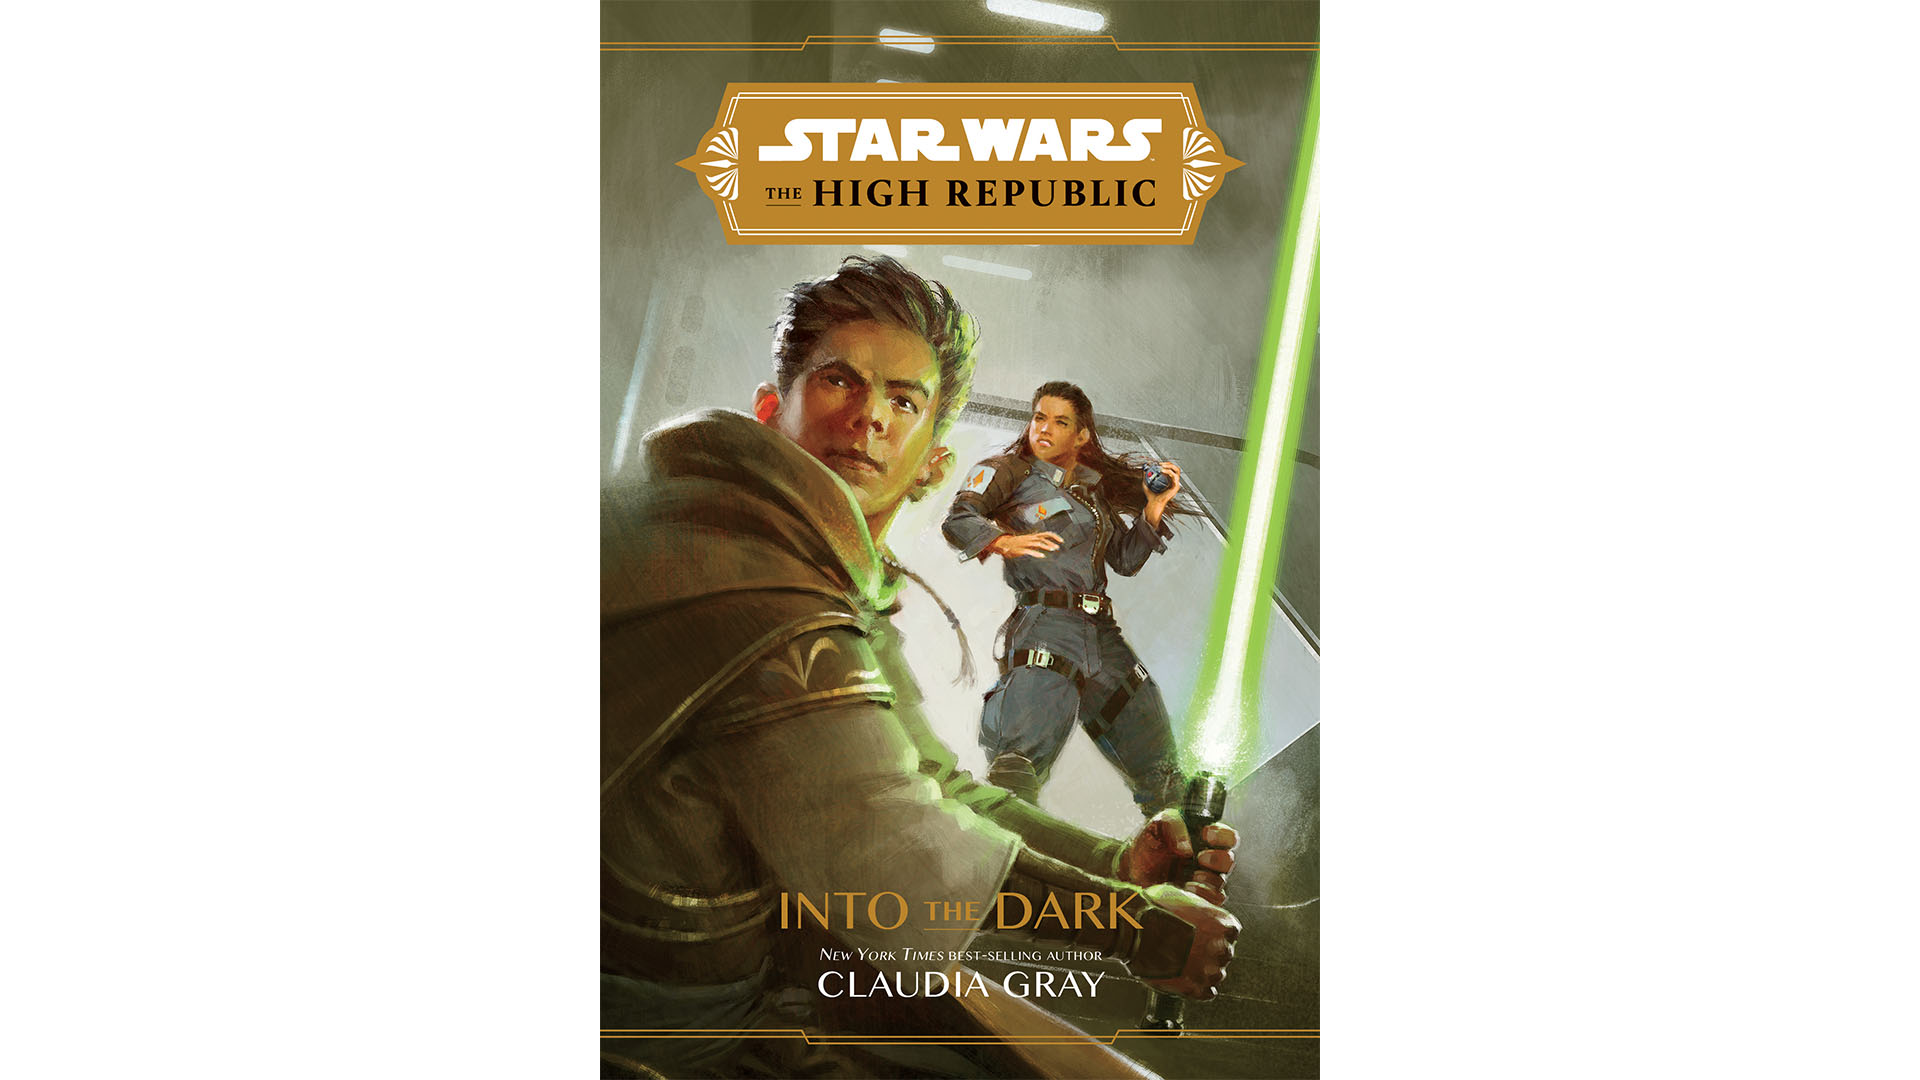 The cover of Star Wars: The High Republic: Into the Dark written by Claudia Gray